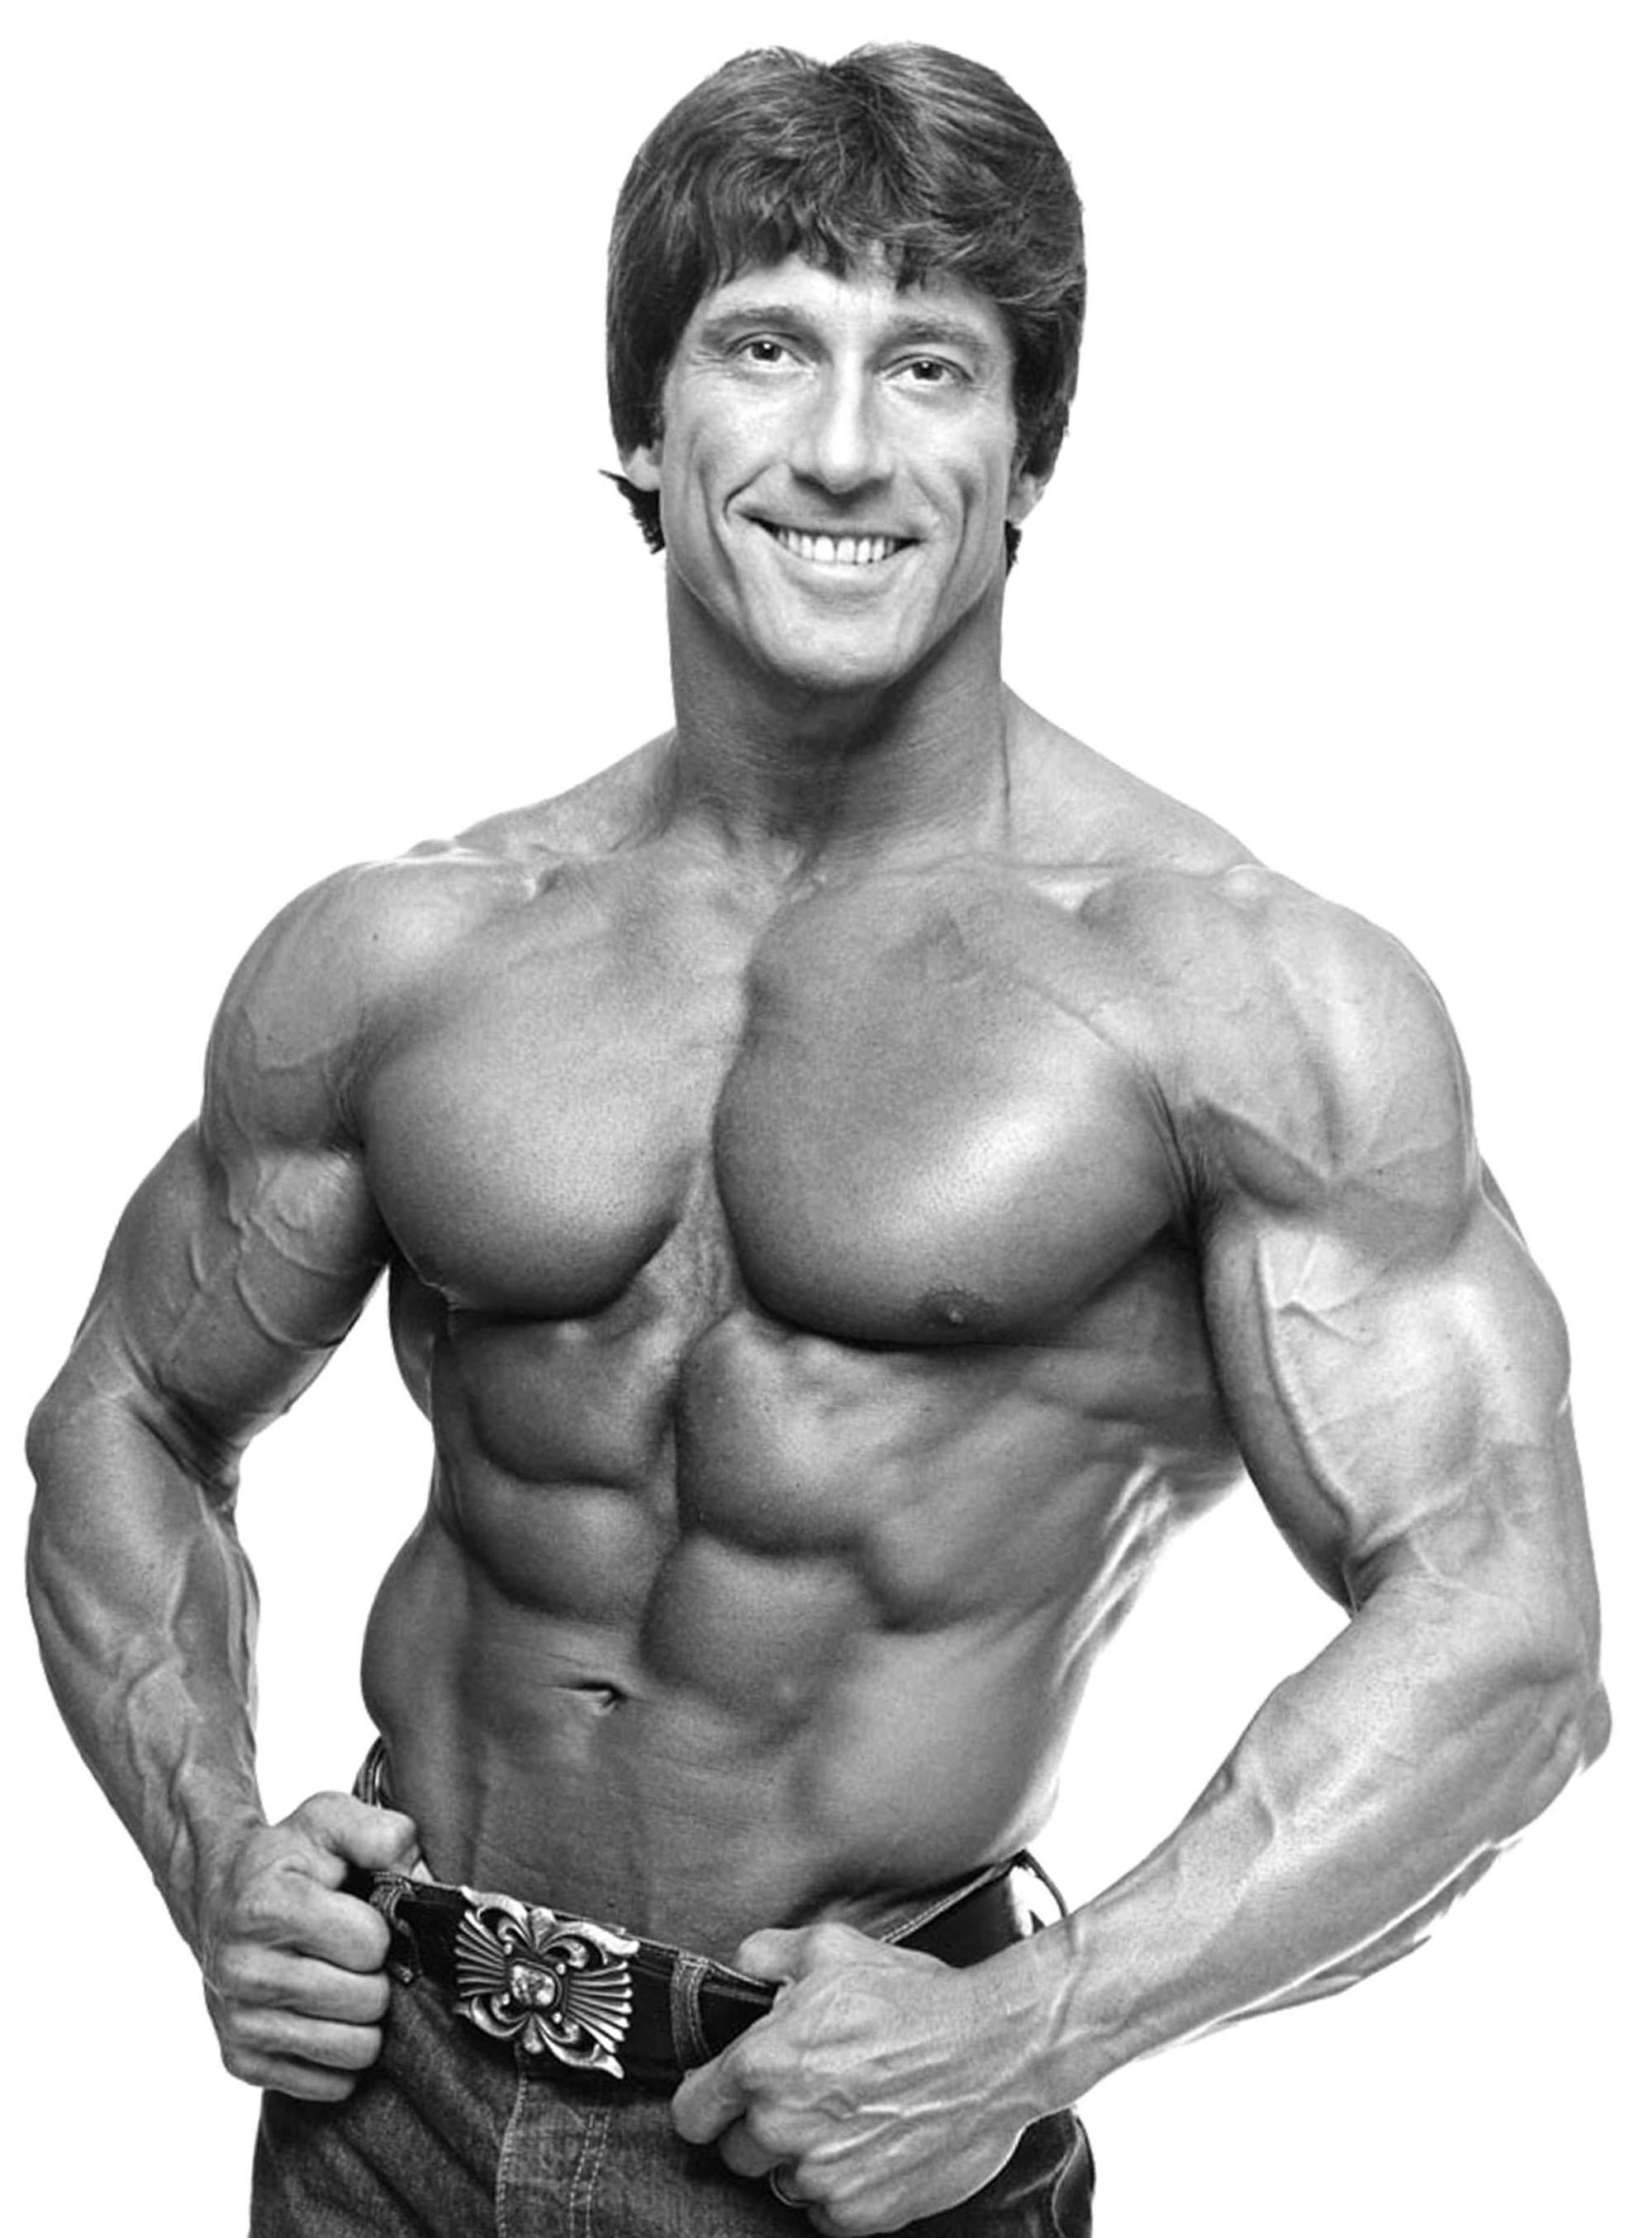 Professional Bodybuilder and three time Mr. Olympia winner Frank Zane - Photograph by Jack Mitchell